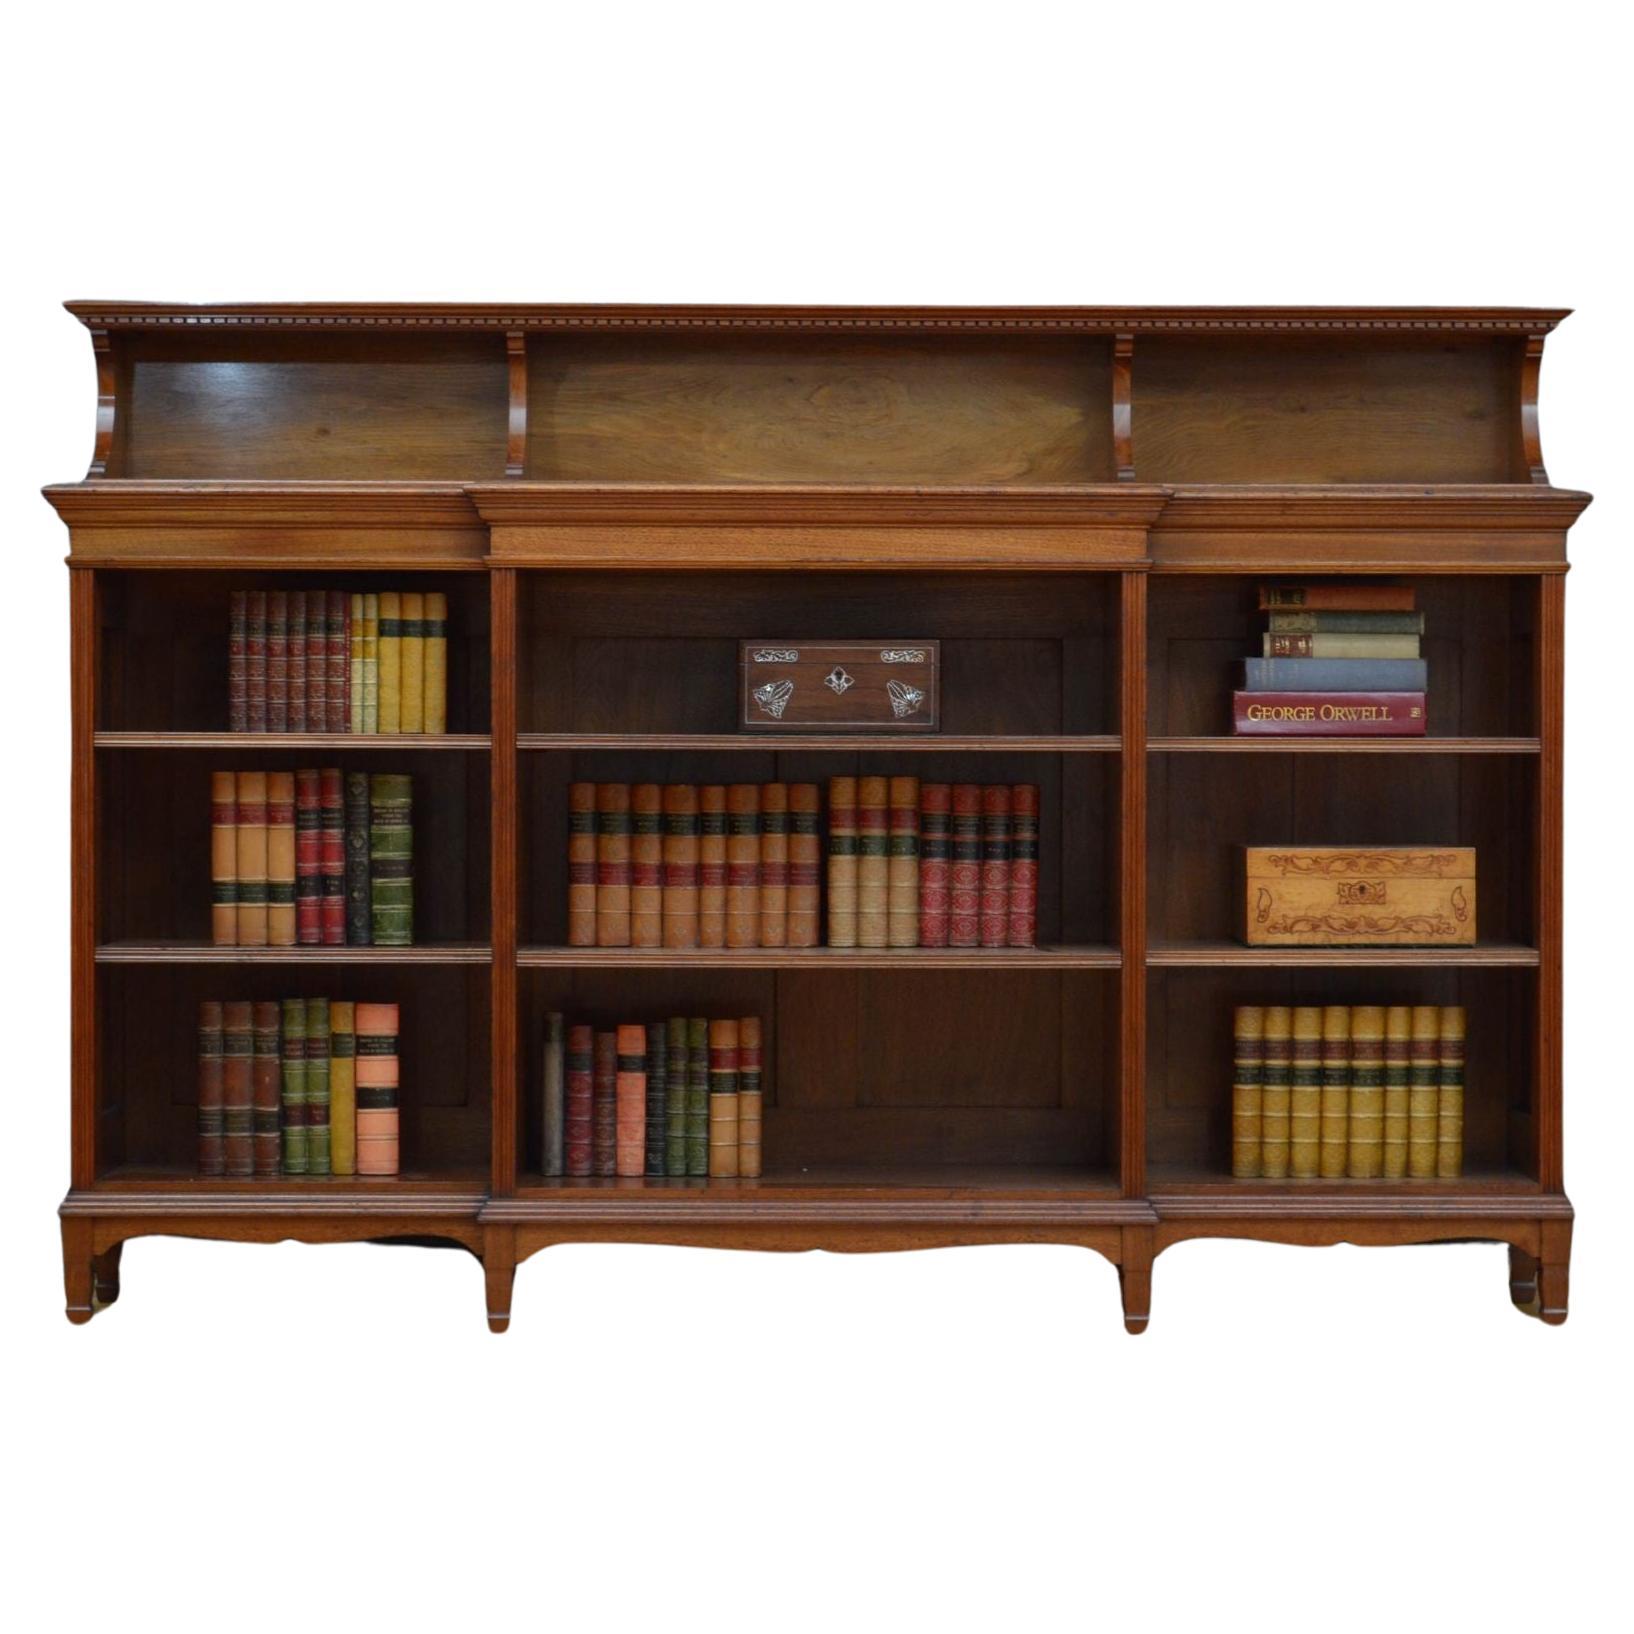 A quality walnut bookcase by Morris and co, designed by George Jack